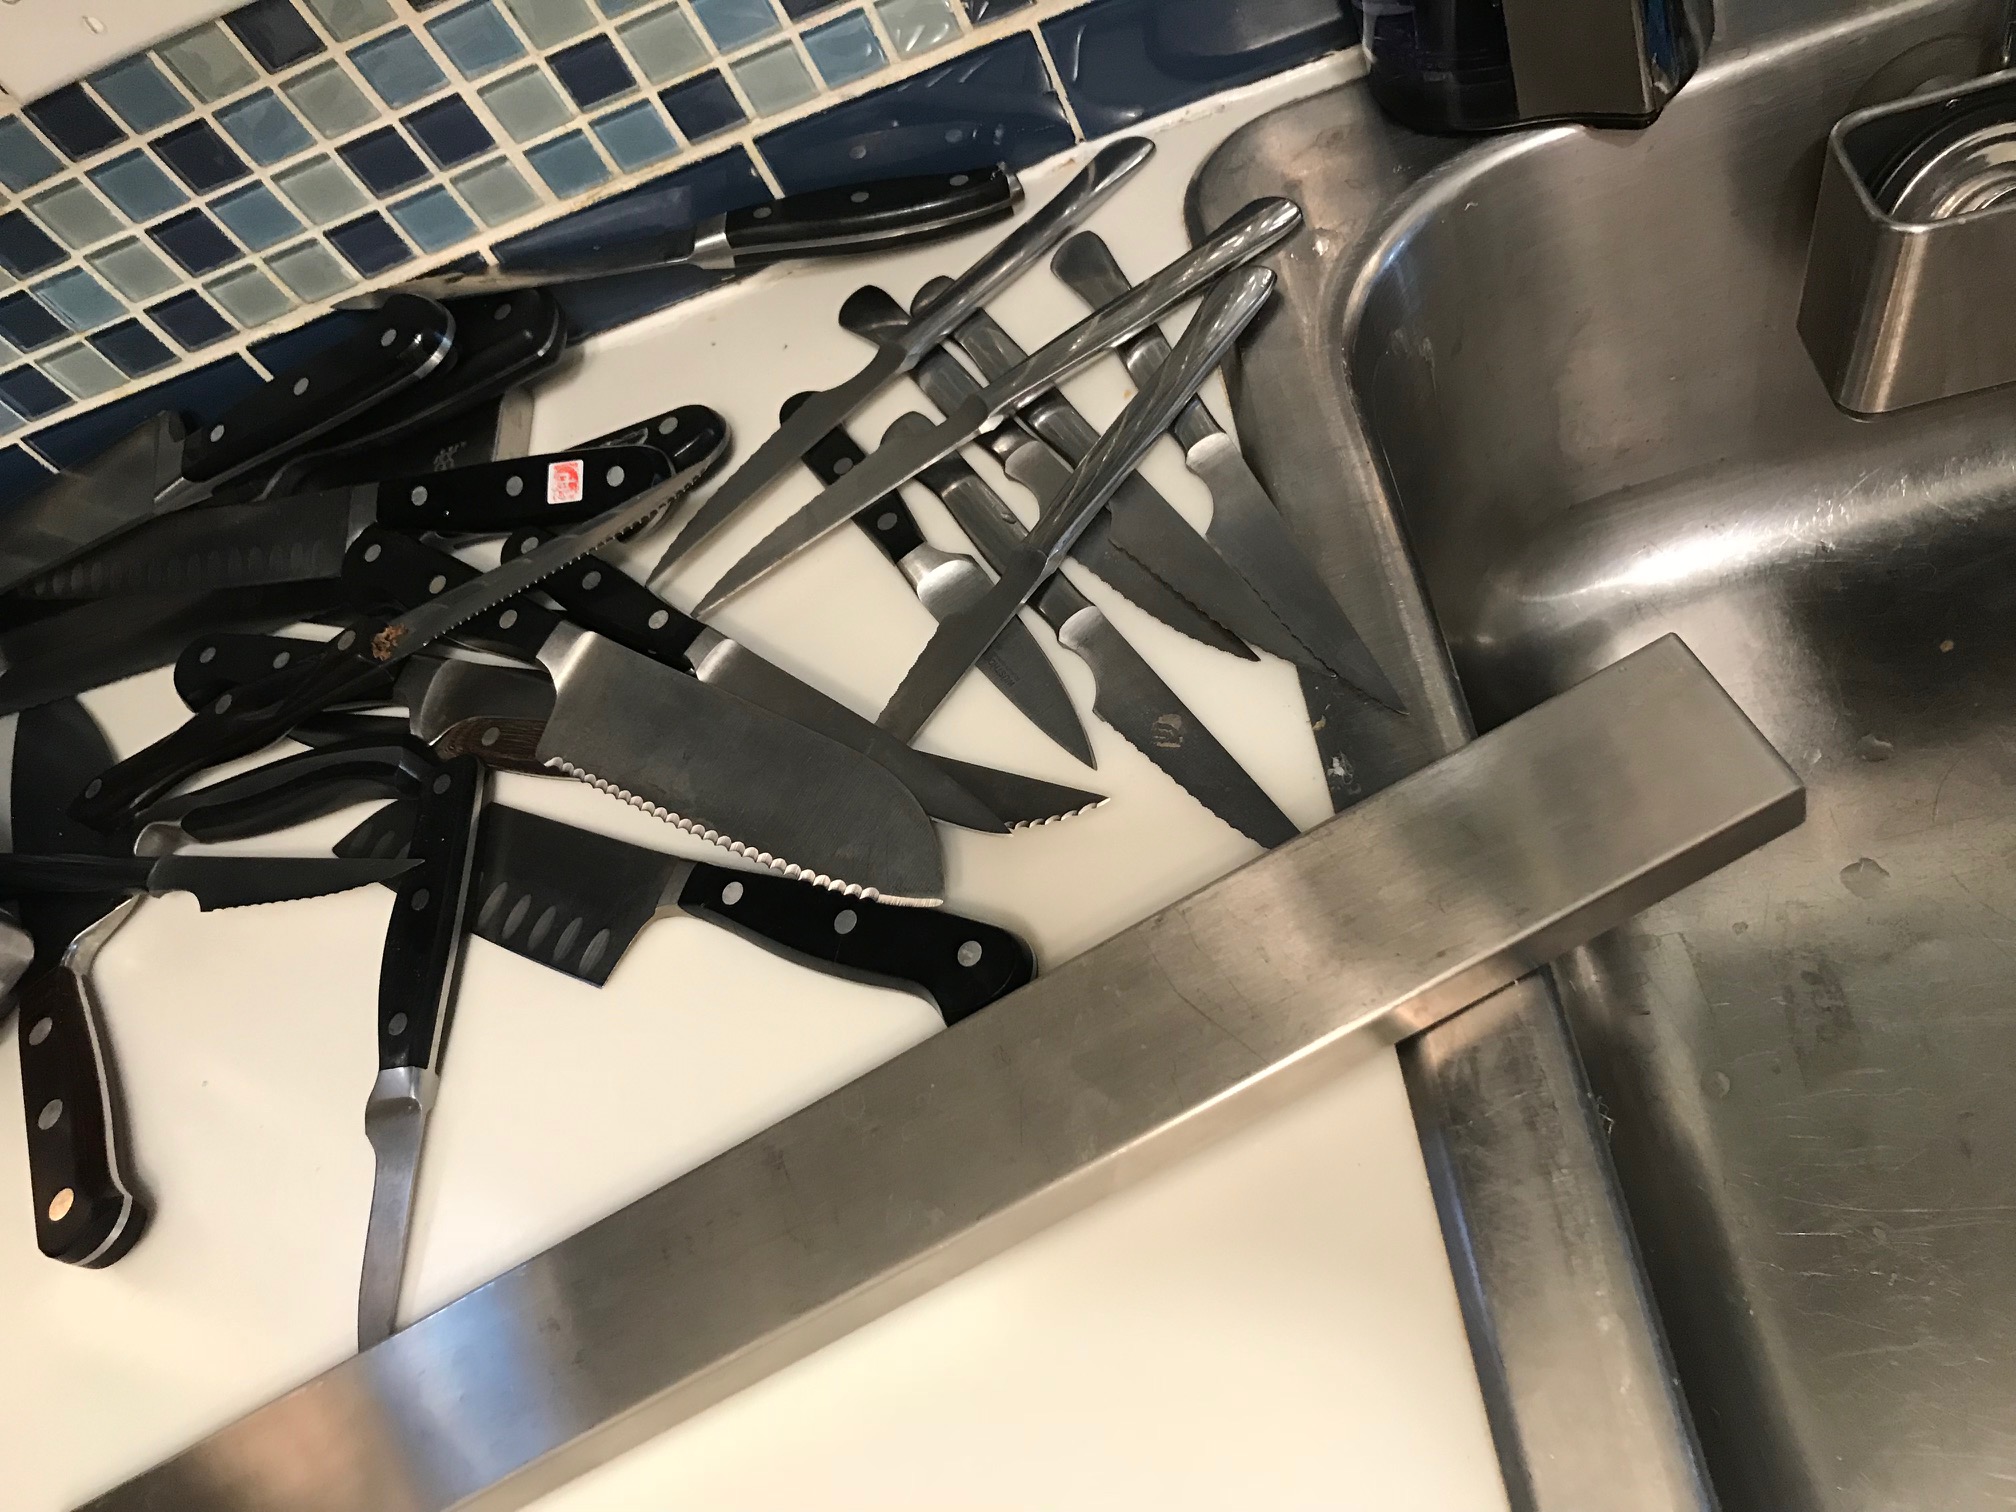 The knife rack fell off the wall within HOURS.